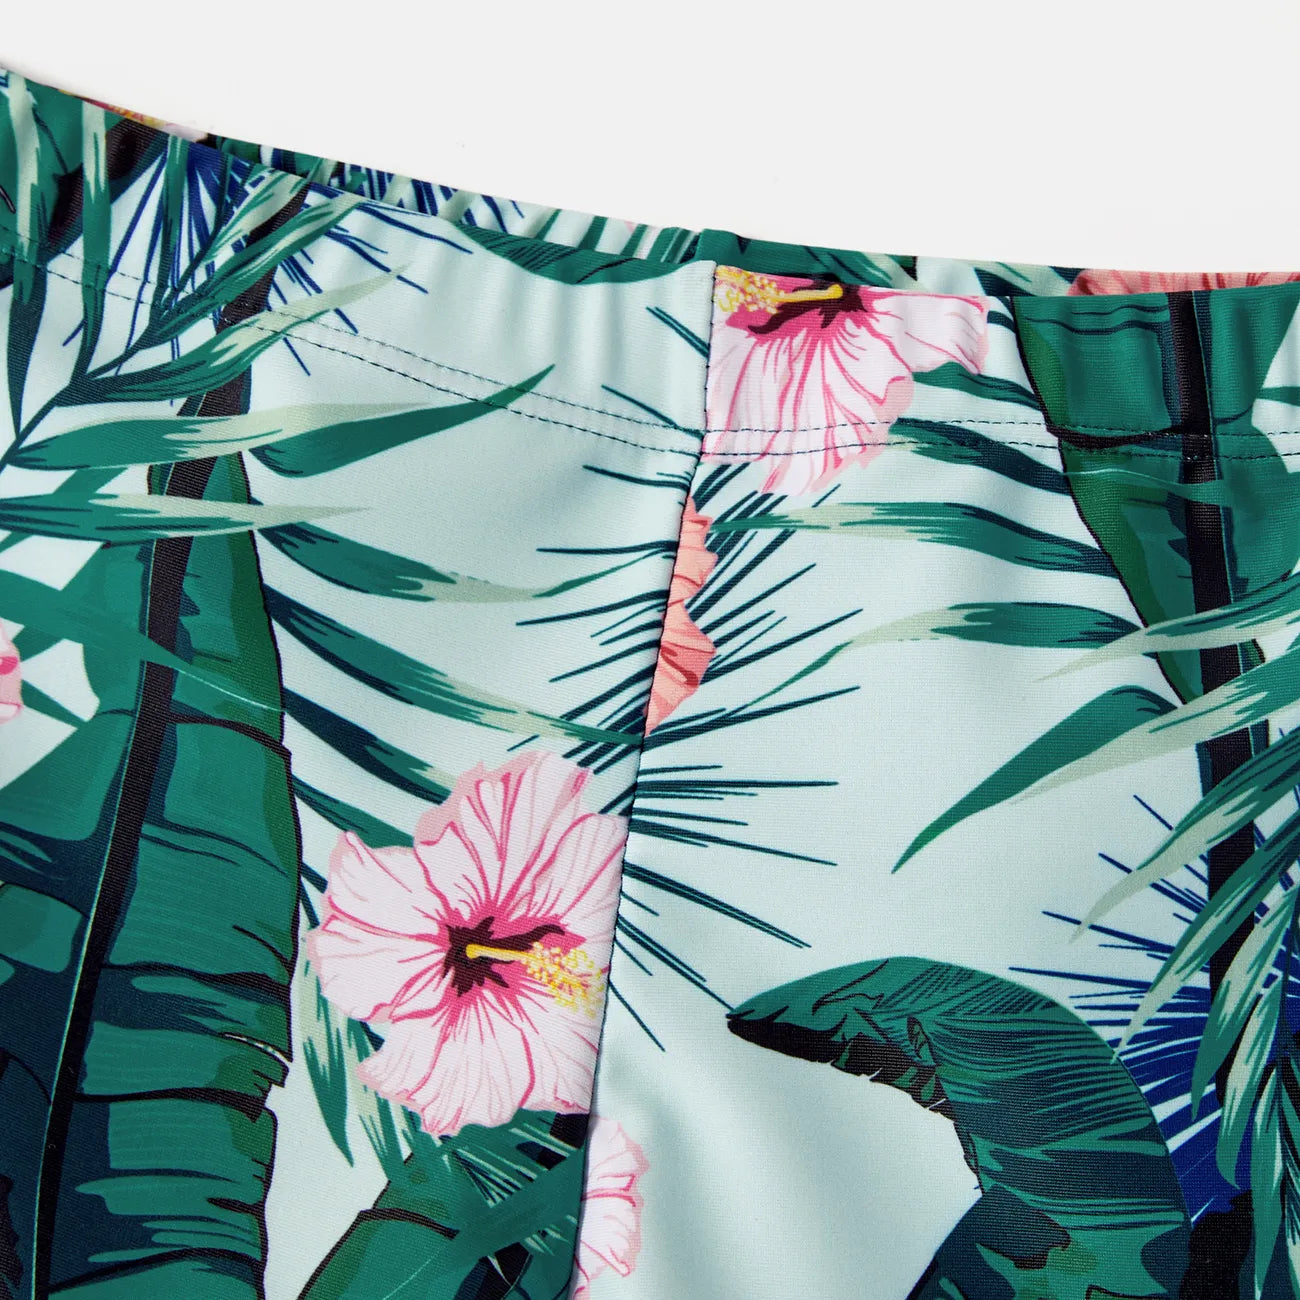 Family Swimwear Swimsuit Floral and Leaf Print Mom Dad Boys Girls - ChildAngle